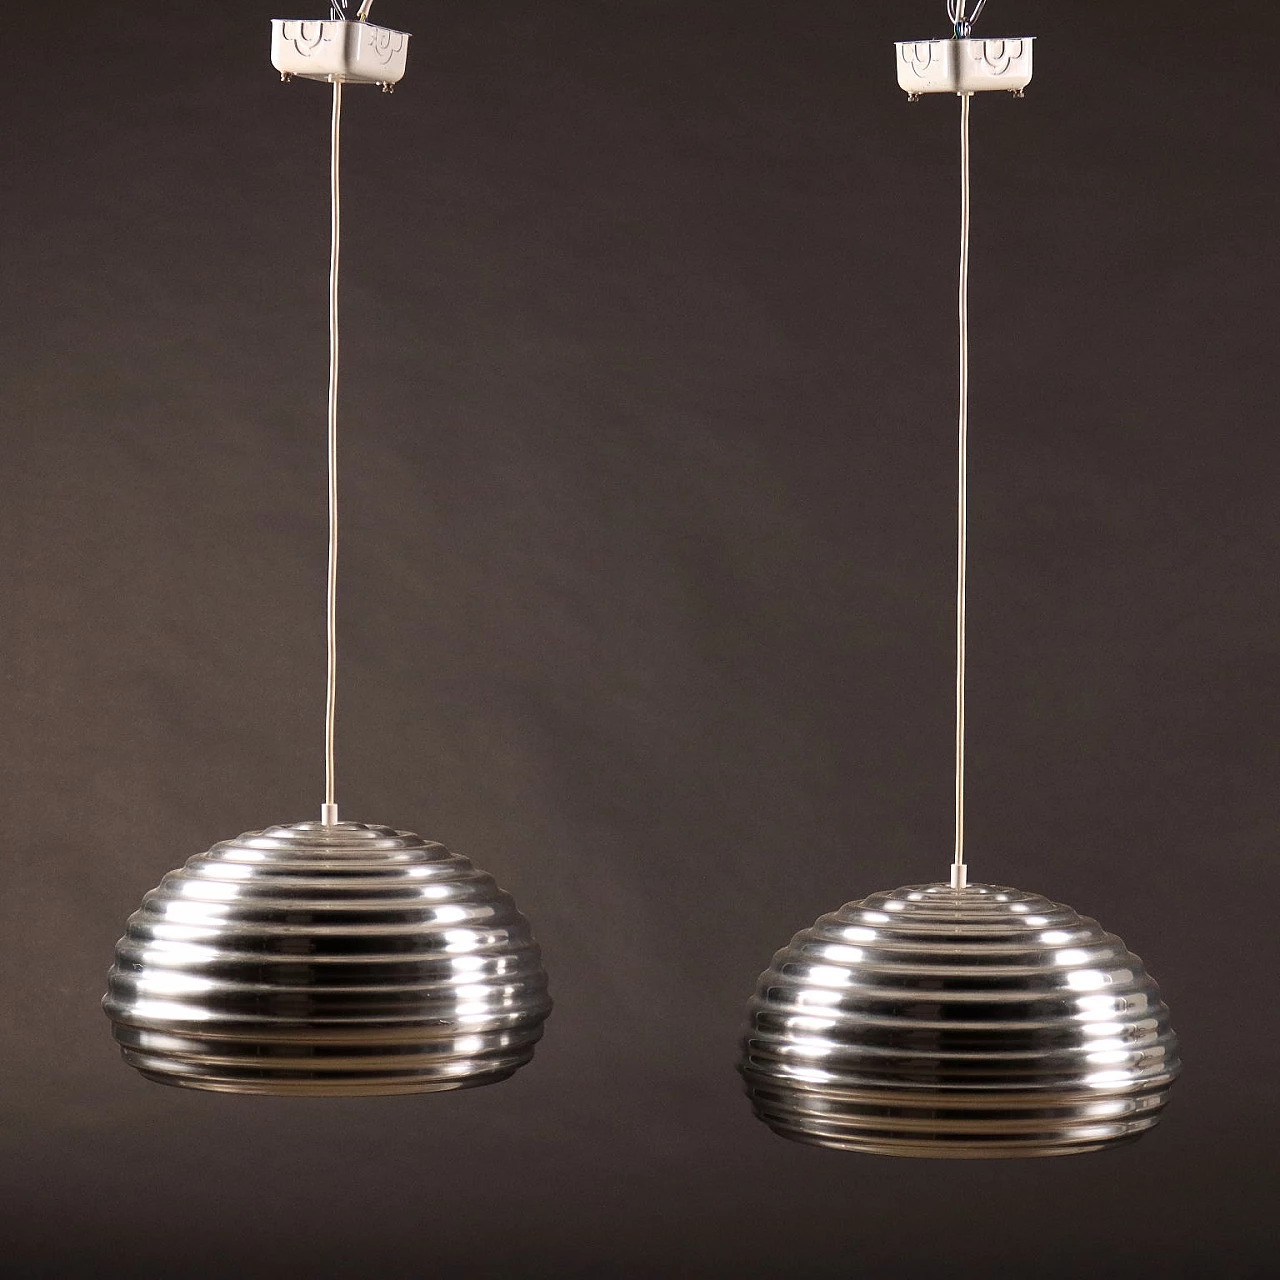 Pair of Splugen Brau lamps by the Castiglioni brothers for Flos, 1970s 1